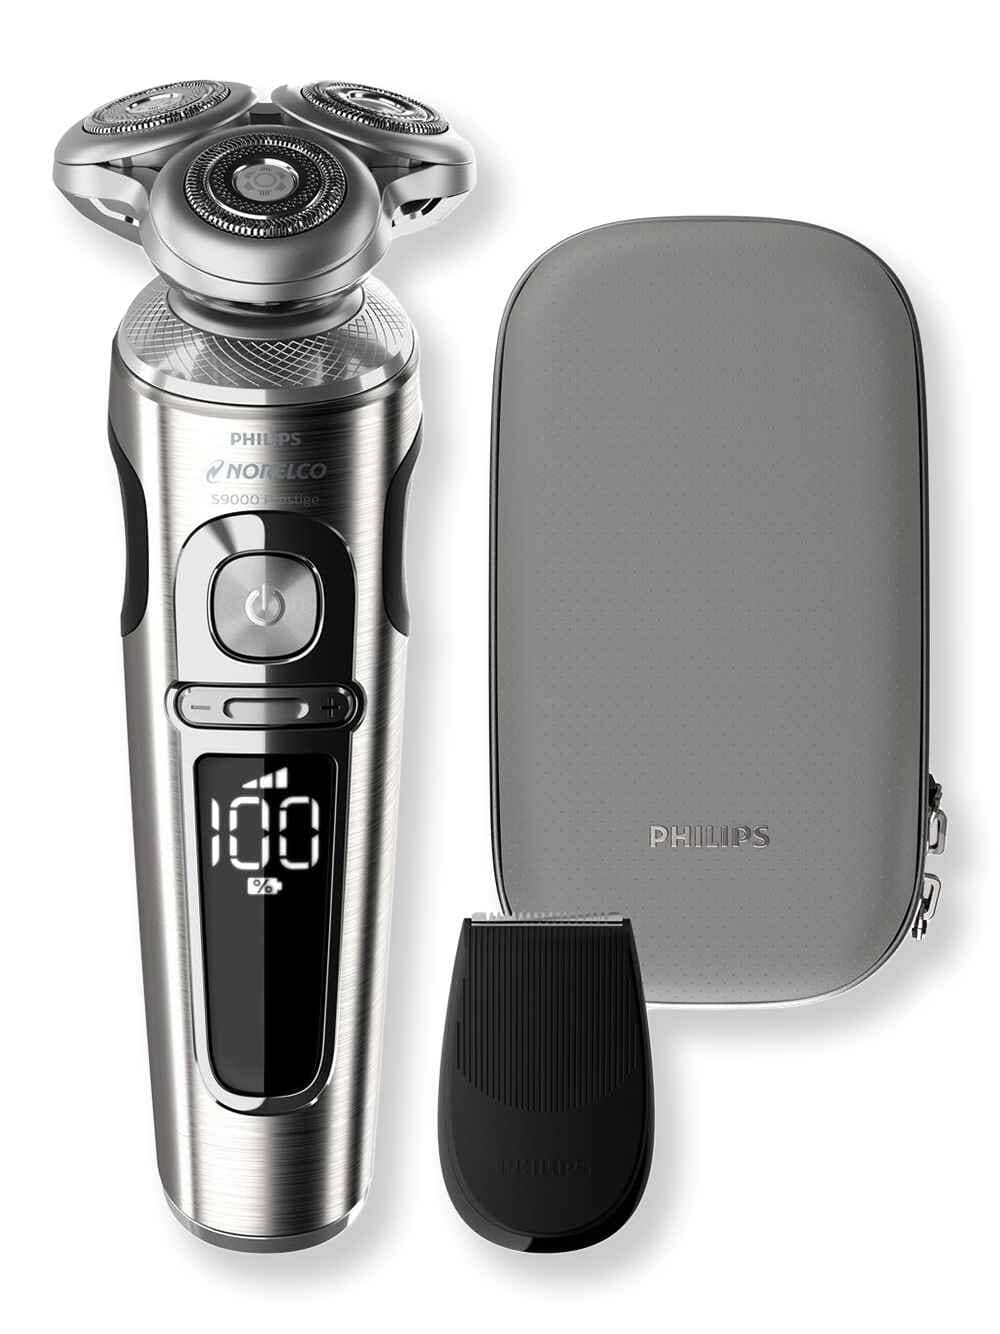 Philips Norelco Philips Norelco S9000 Prestige Electric Shaver with Precision Trimmer & Premium Case Razors, Blades, & Trimmers 